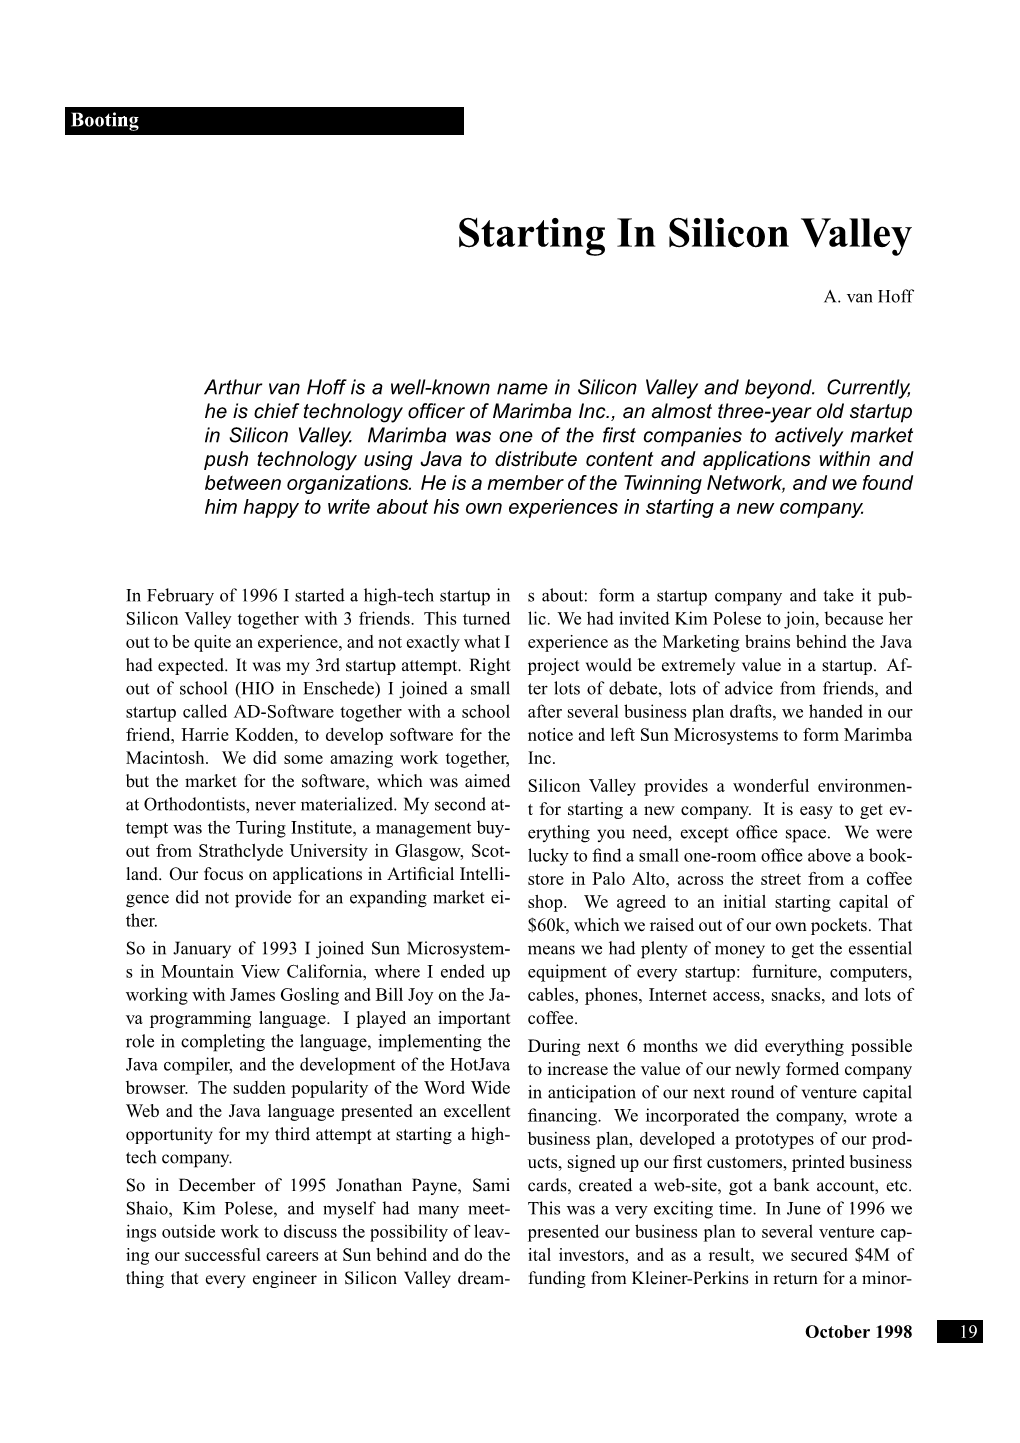 Starting in Silicon Valley